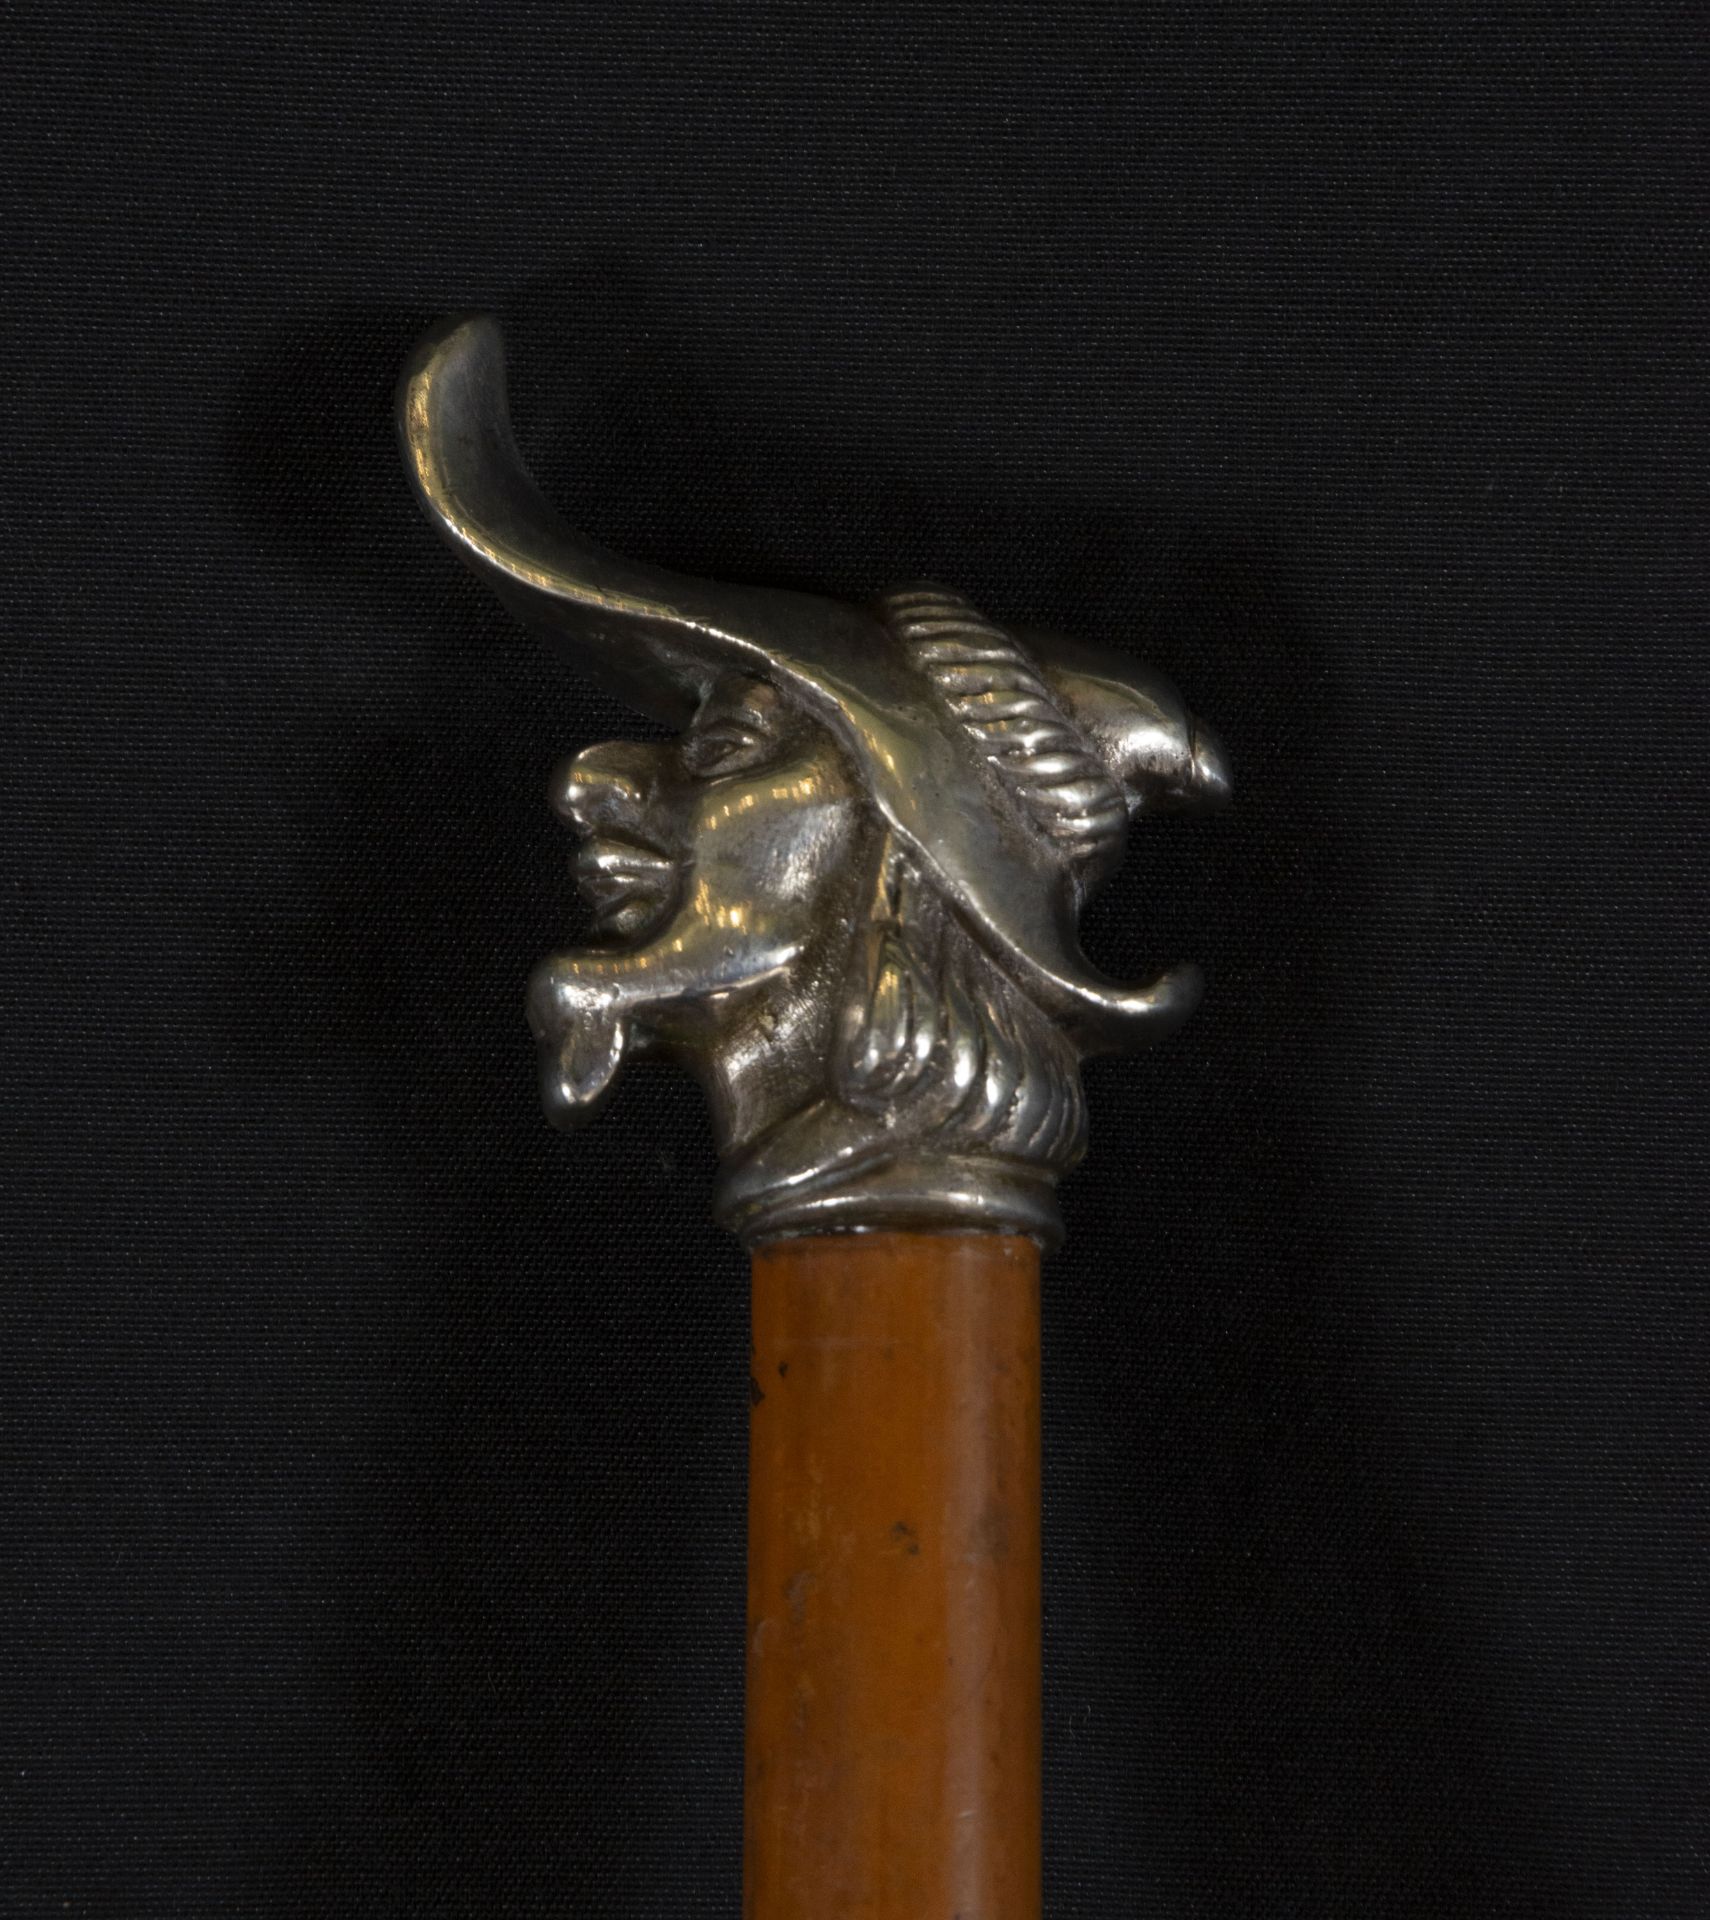 French cane, made of tropical wood and embossed silver head in the shape of a trobador's head, 19th 